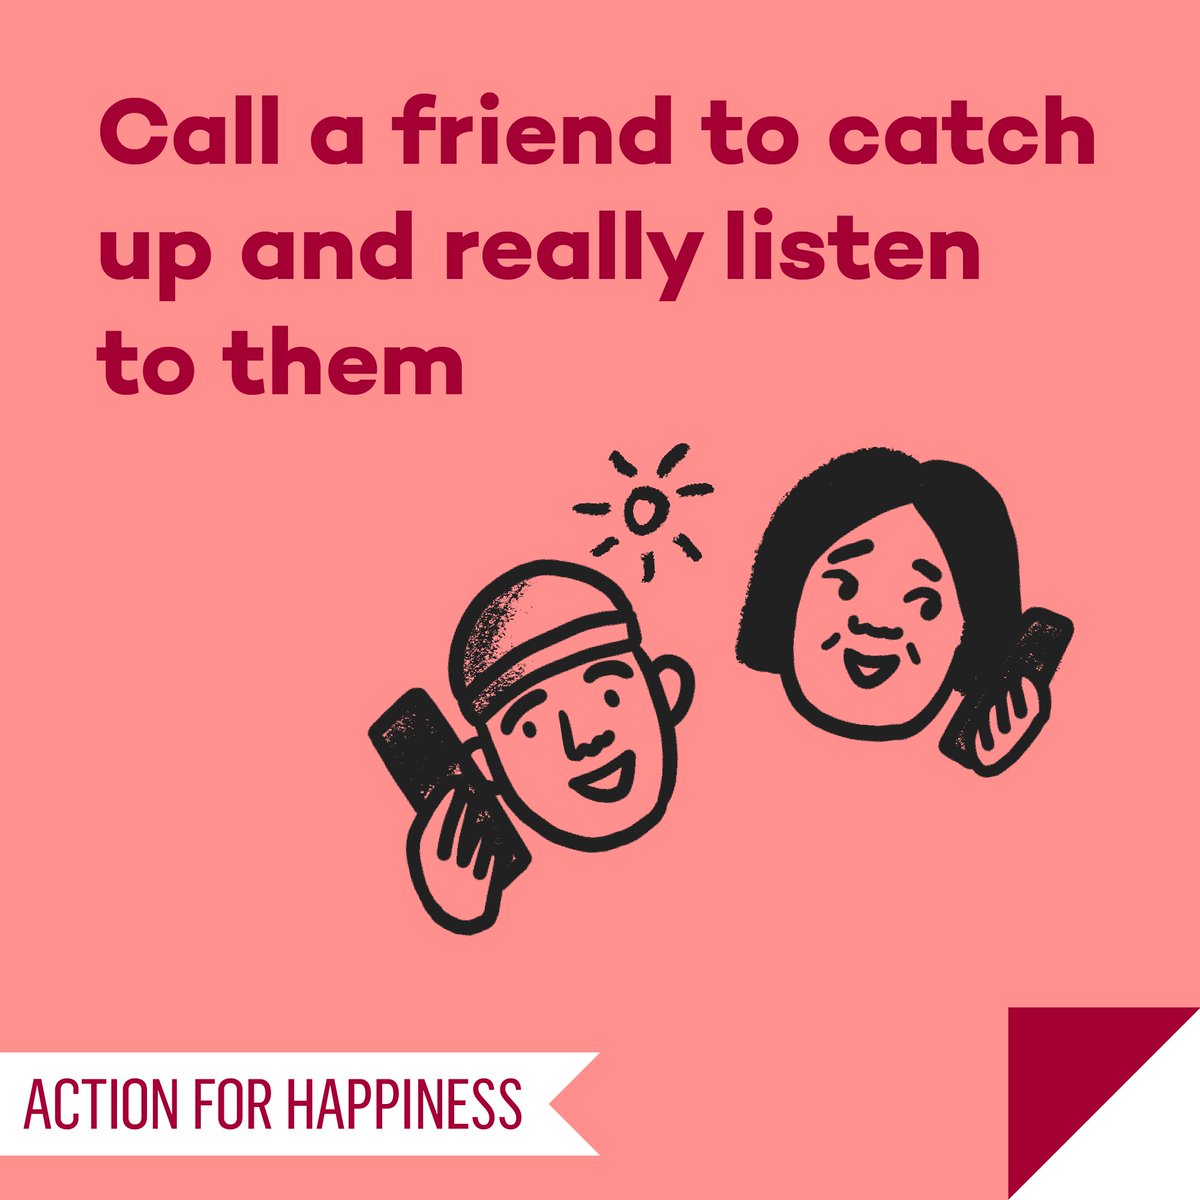 Friendly February - Day 27: Call a friend to catch up and really listen to them actionforhappiness.org/friendly-febru… #FriendlyFebruary